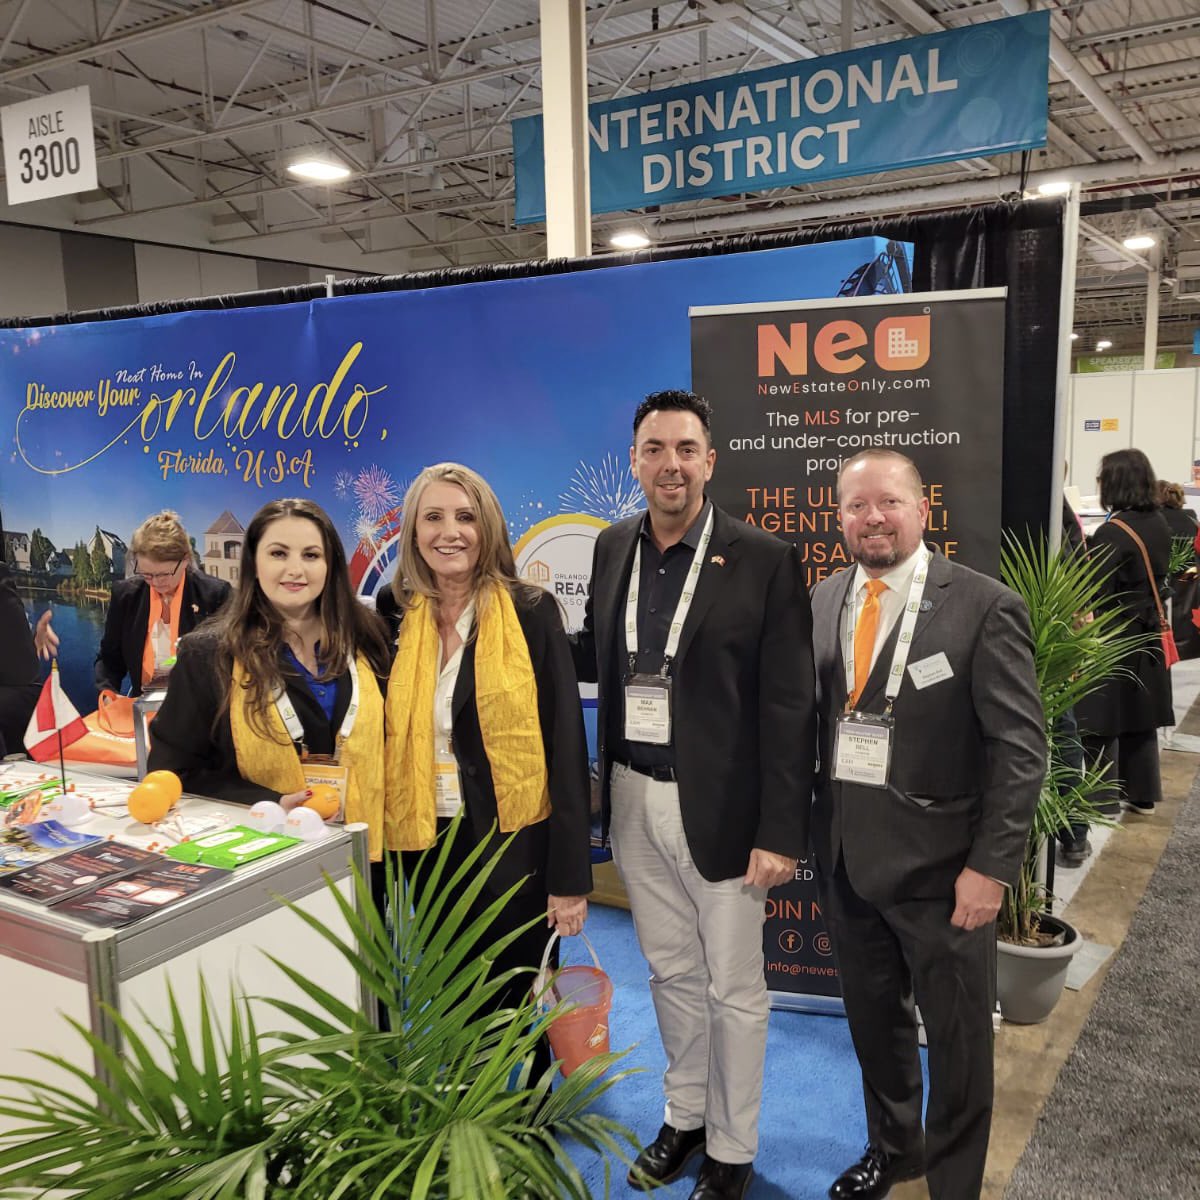 Day 1 at the TRREB REALTOR® QUEST- Canada’s largest real estate conference and trade show.

#realestate #trreb #trrebrealtorquest2023 #globalrealestate #globalrealtor #internationalrealtor